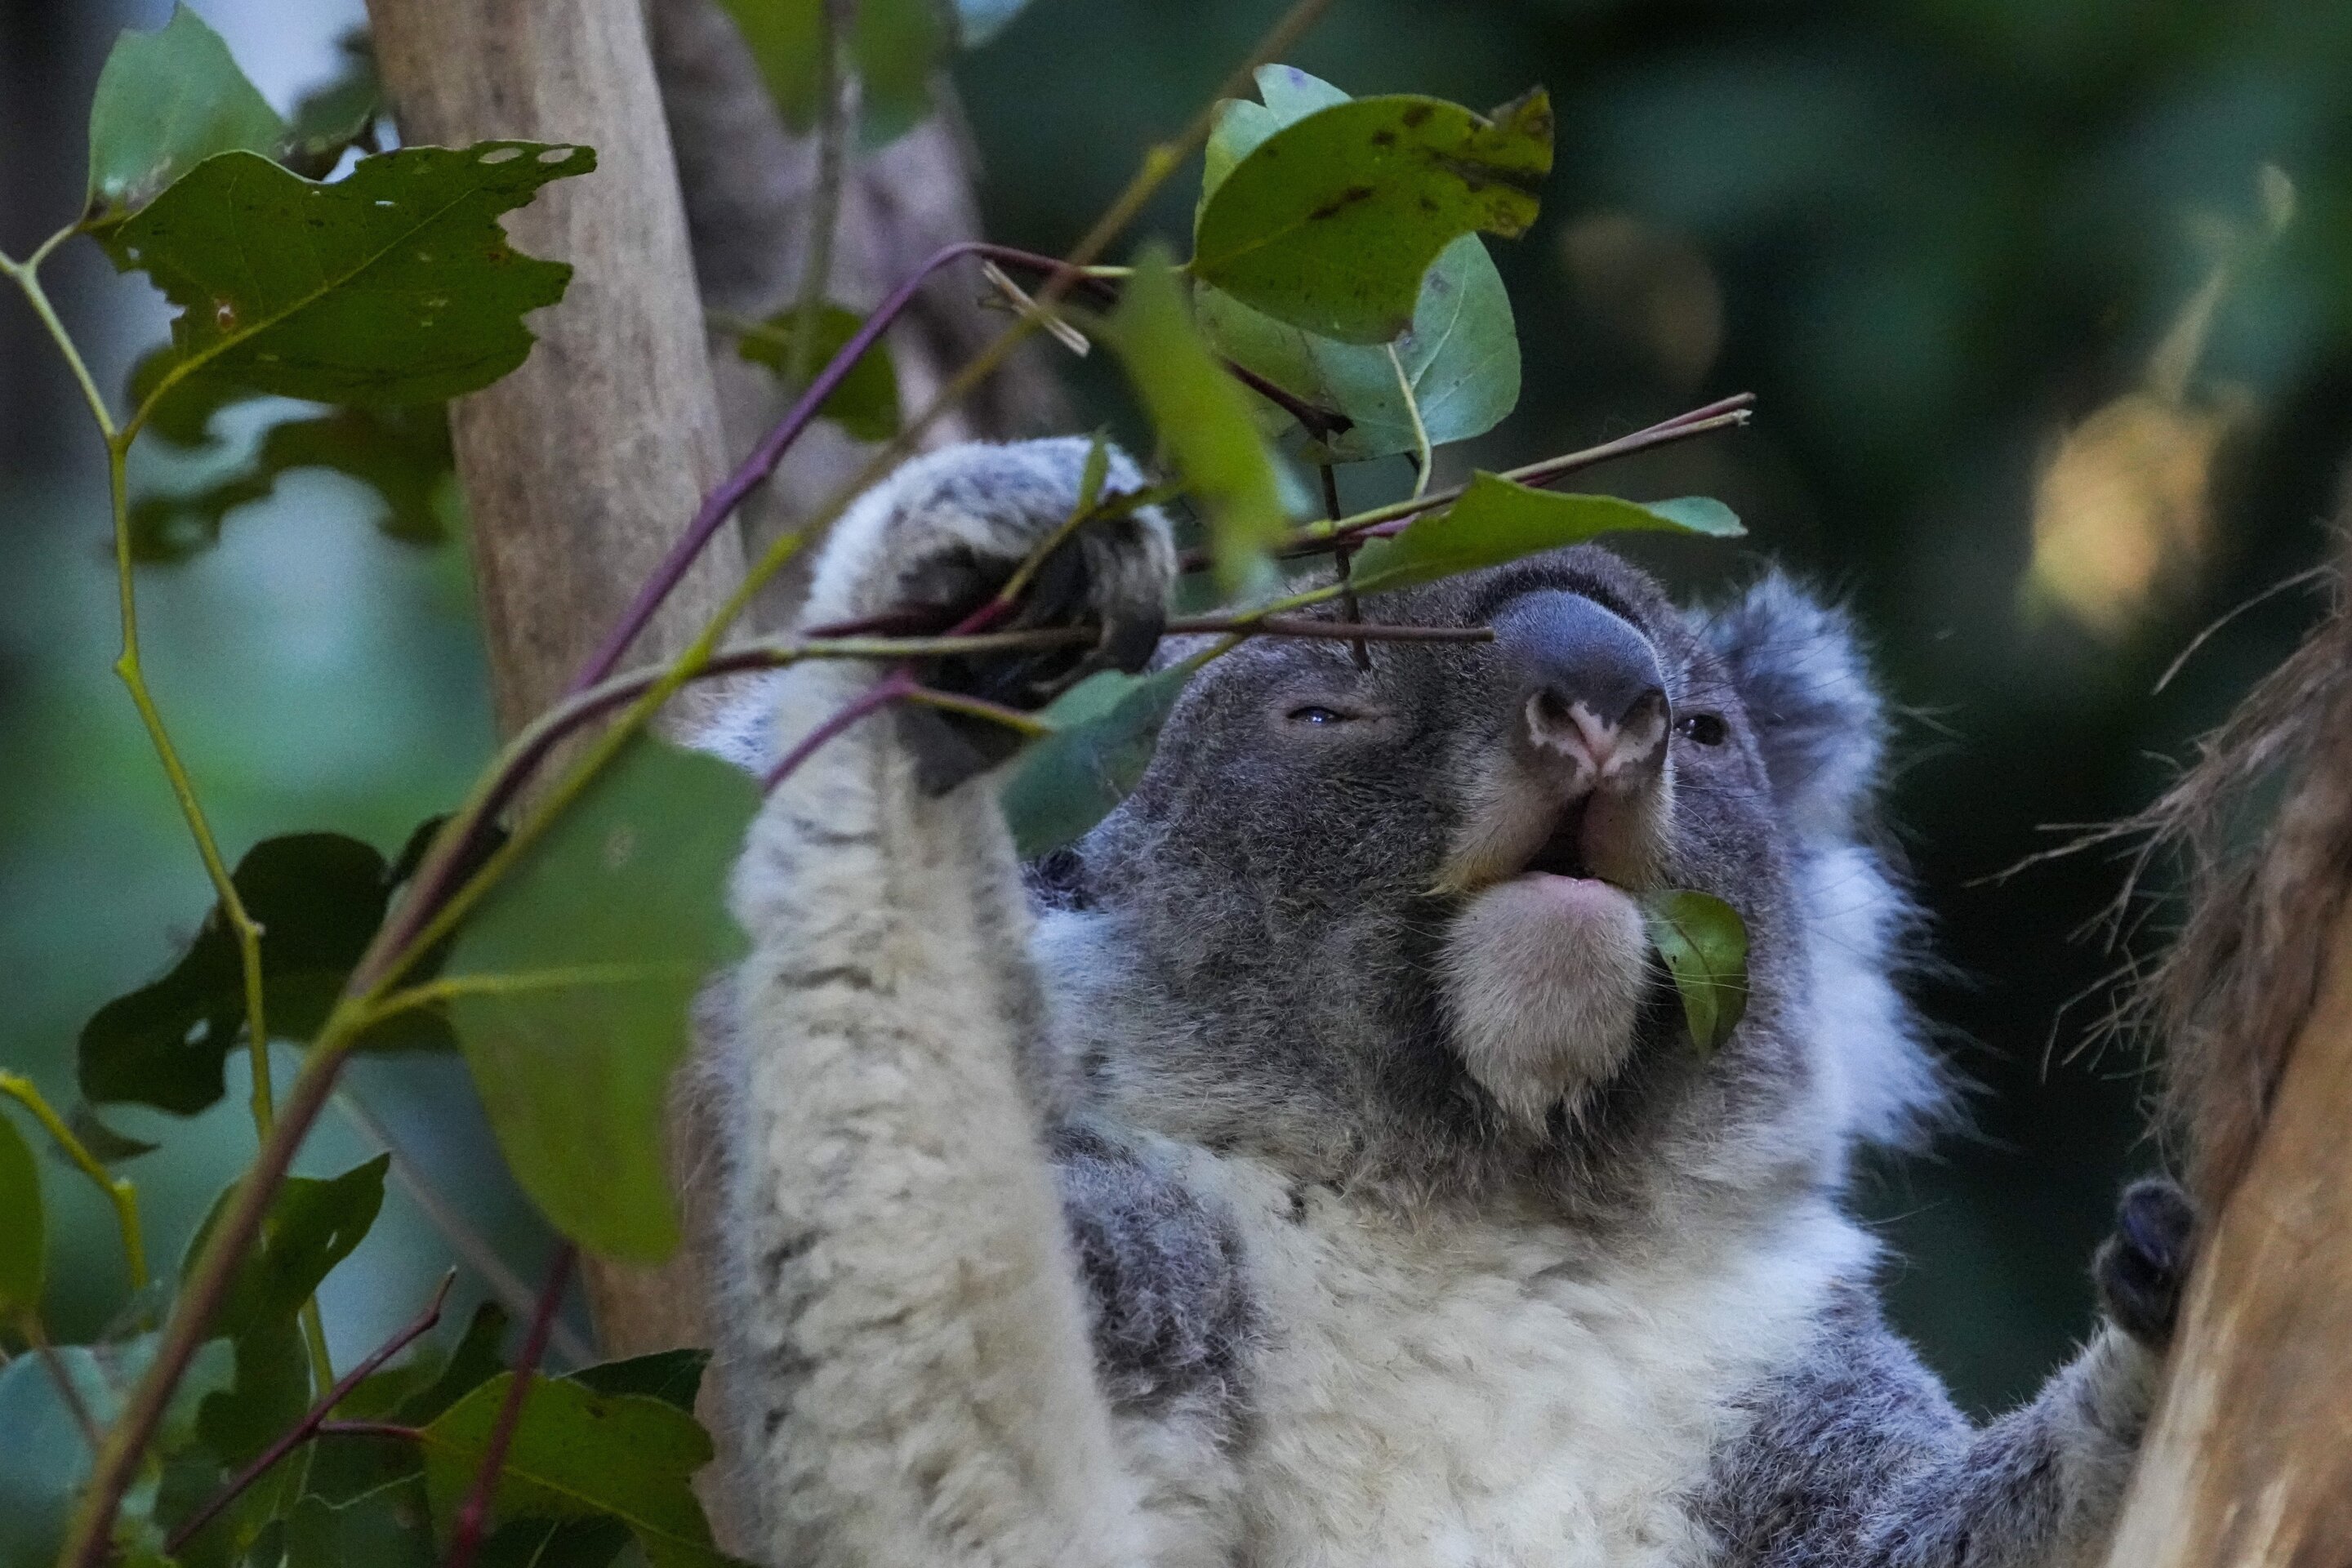 Wild koalas successfully caught and vaccinated for chlamydia for first time